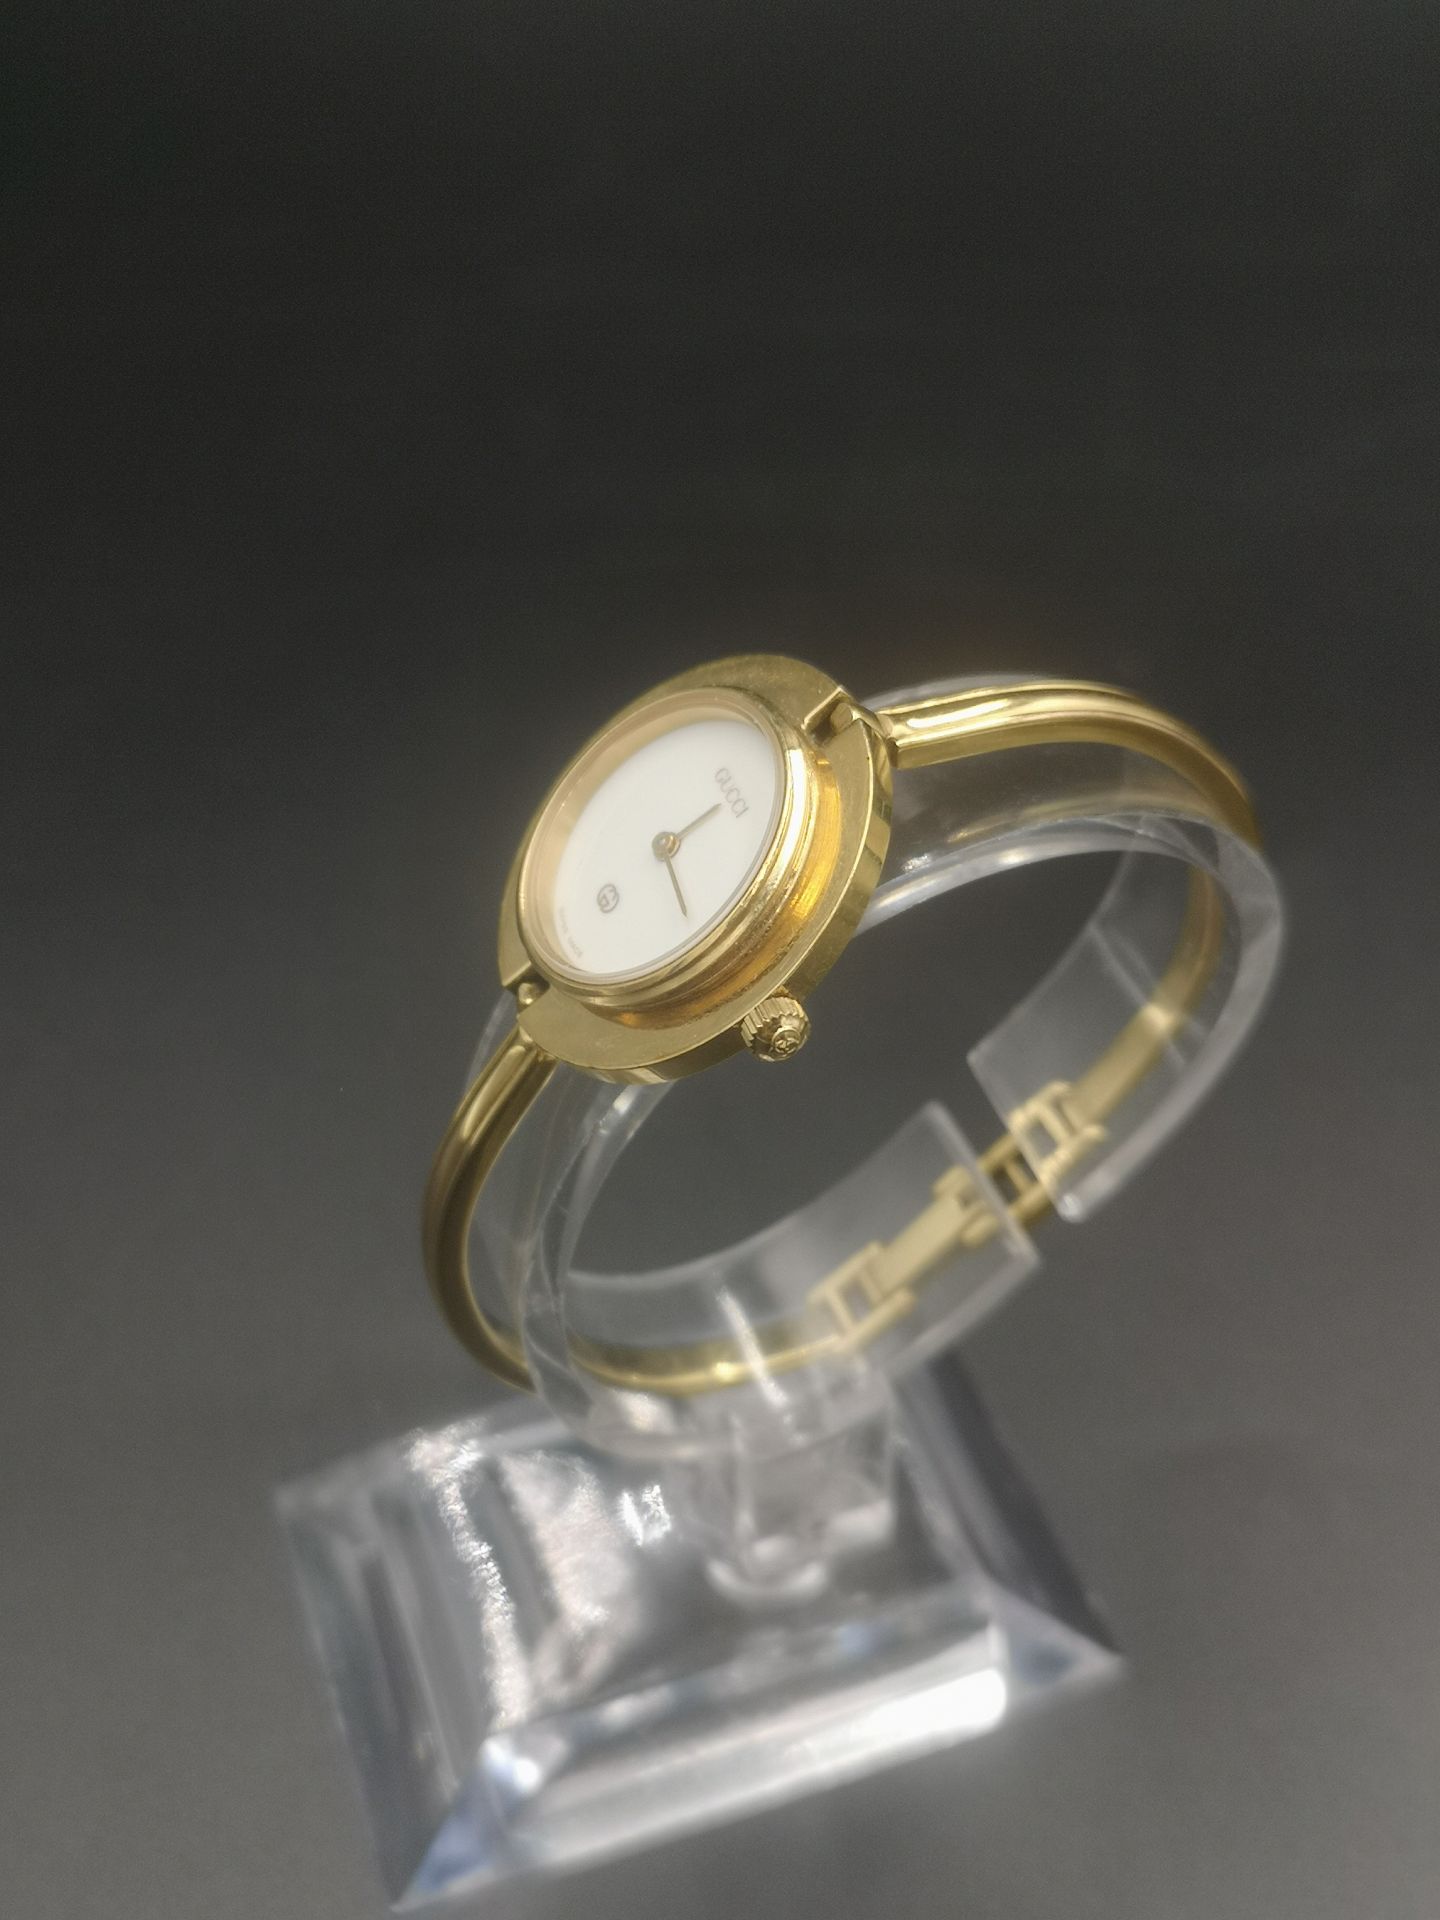 Gucci gold plated ladies quartz wrist watch with 11 interchangeable bezels - Image 3 of 6